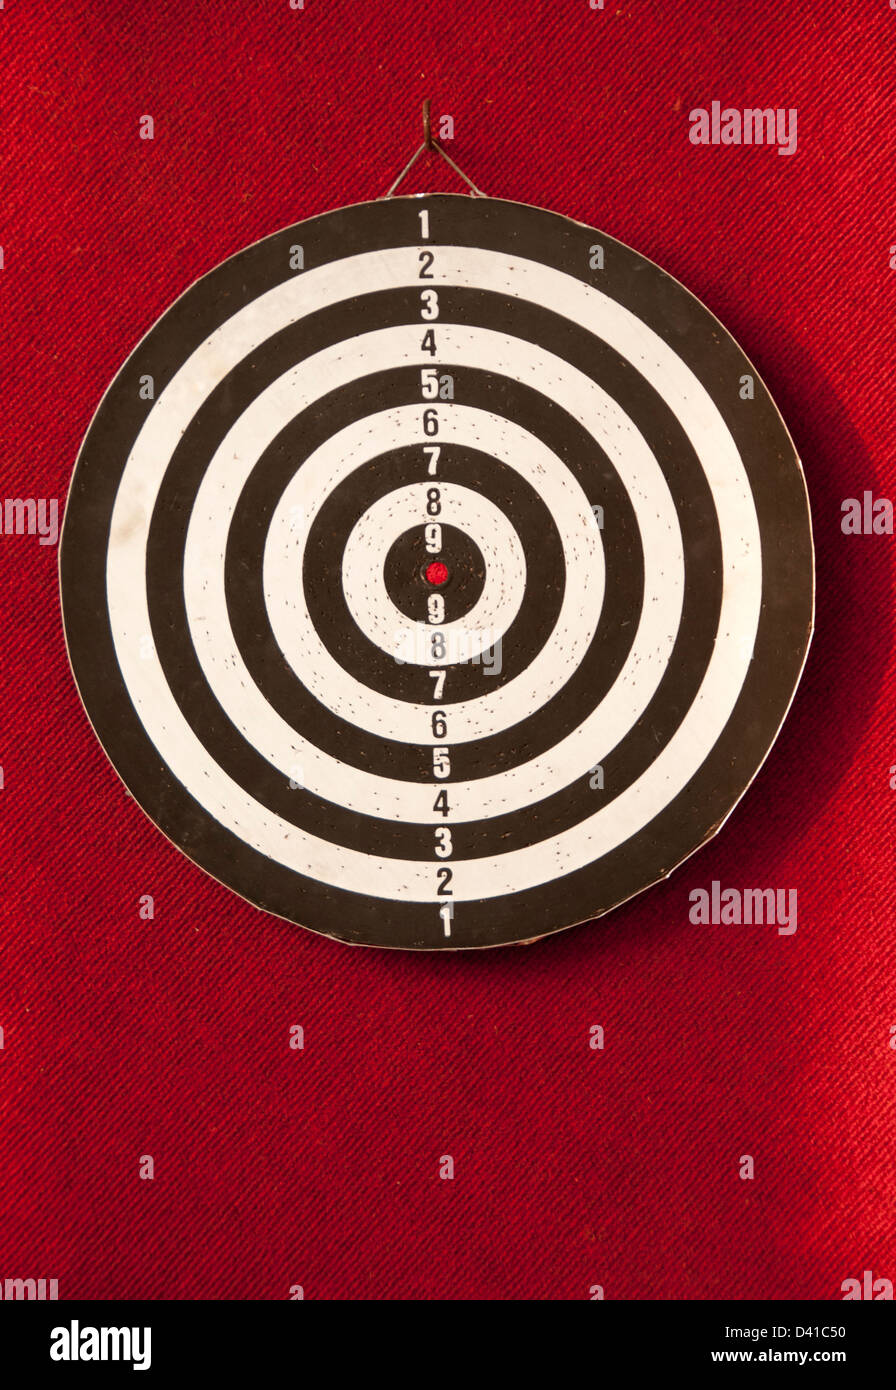 Dart board in red background Stock Photo